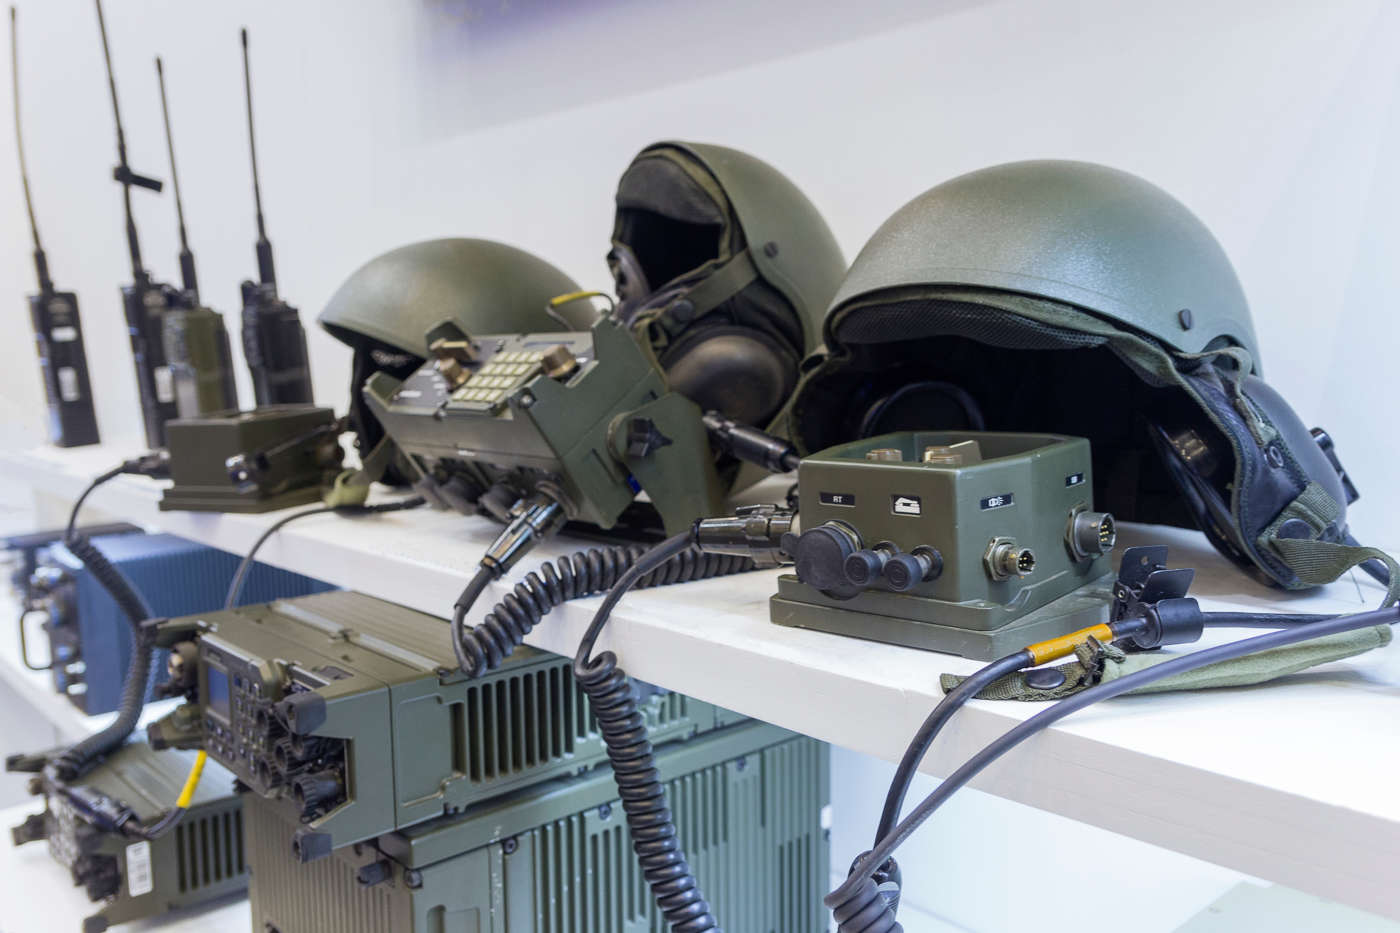 Military helmet and electronics at the exhibition. Weapons